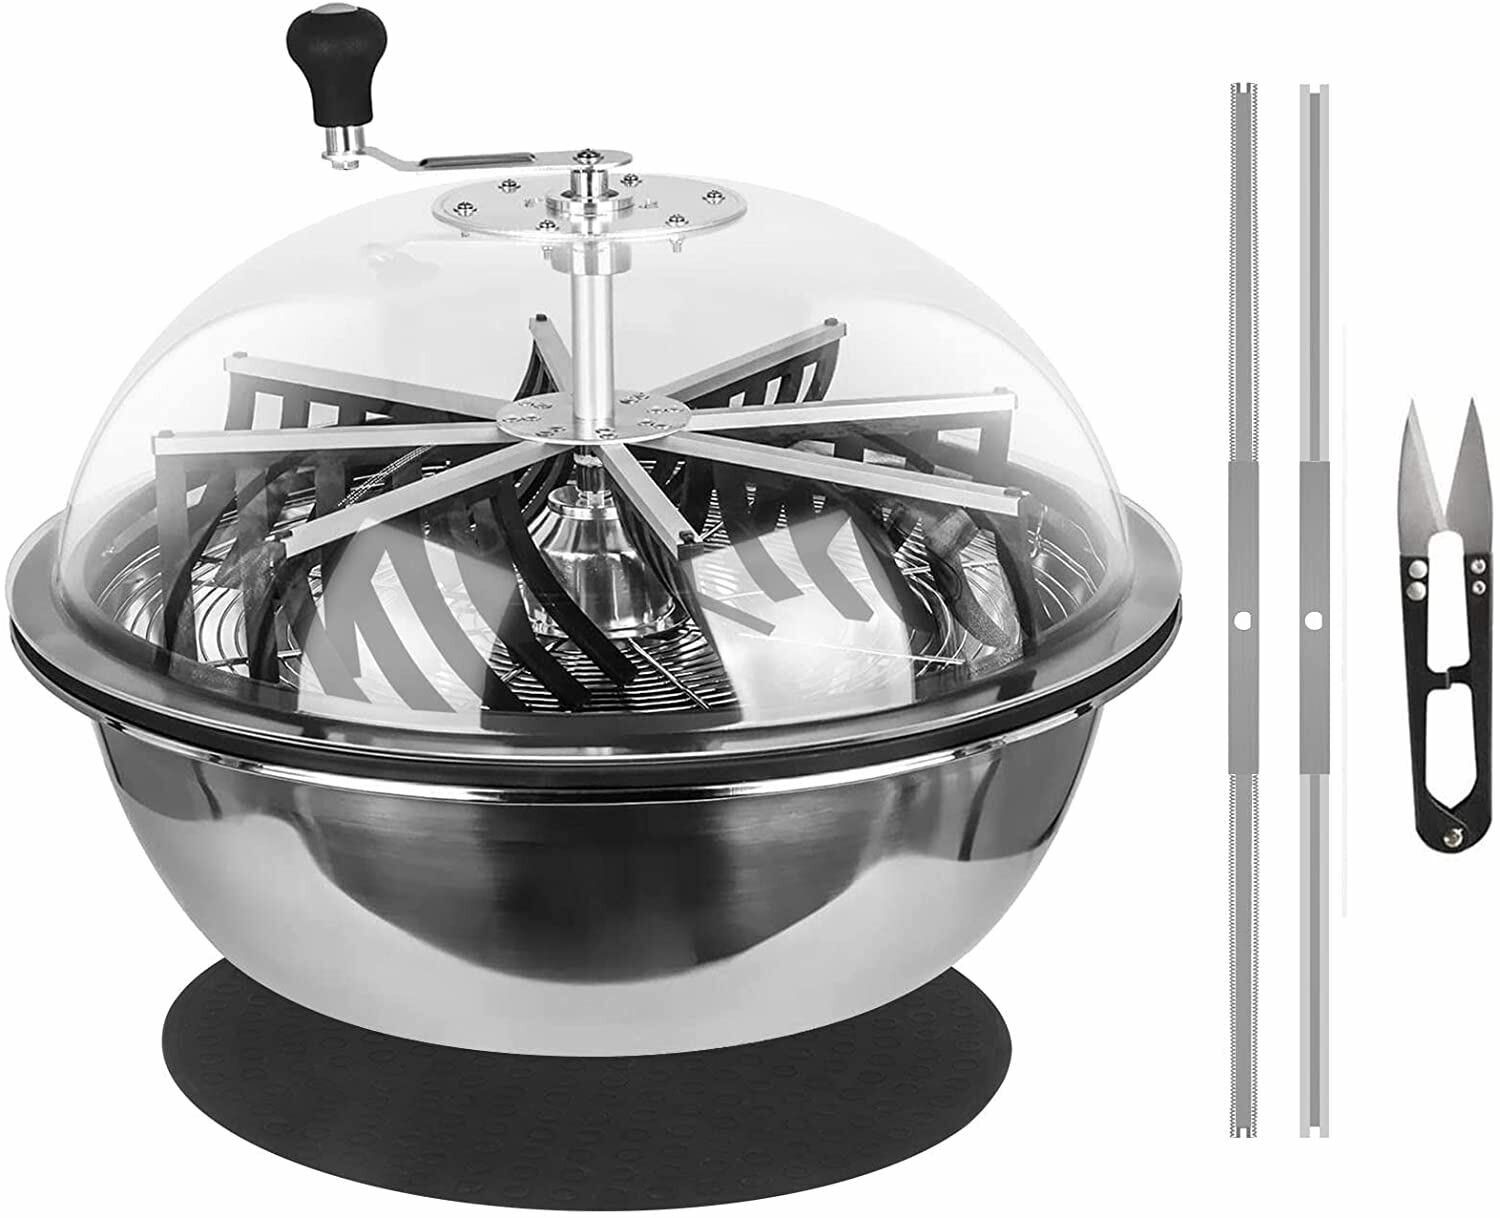 iPower 24 inch Leaf Bowl Trimmer Machine Twisted Spin Cut with Steel Blades Box